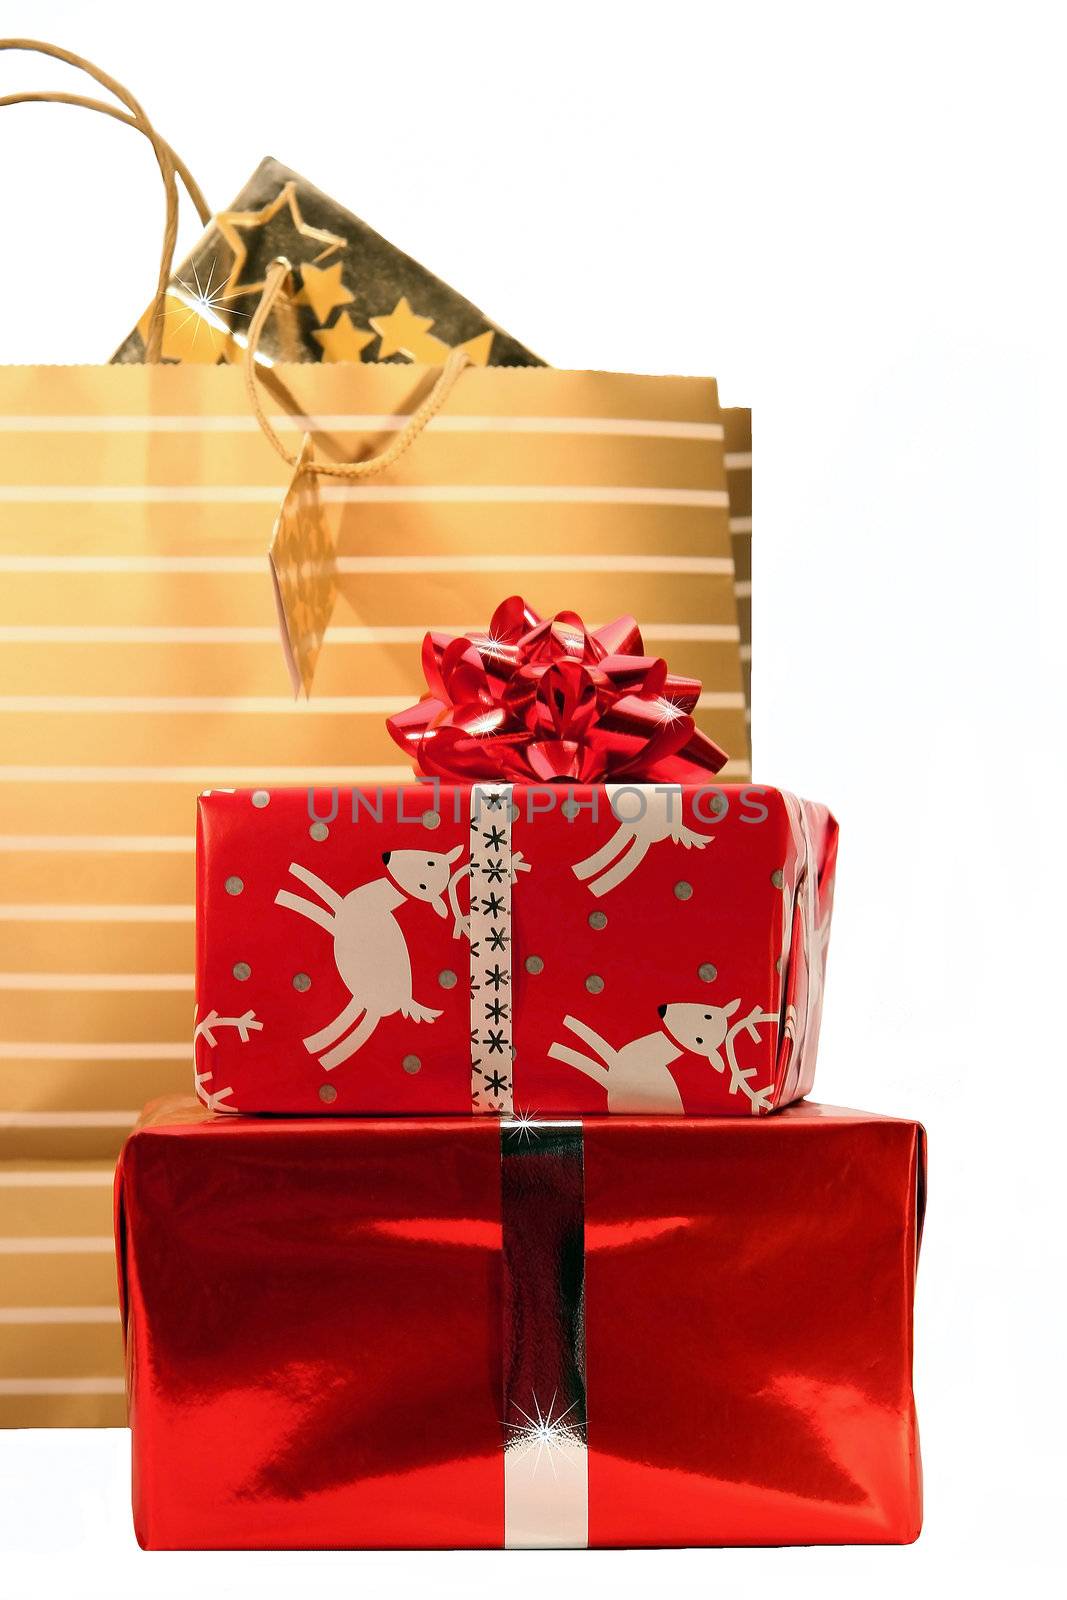 Christmas shopping bags and gifts